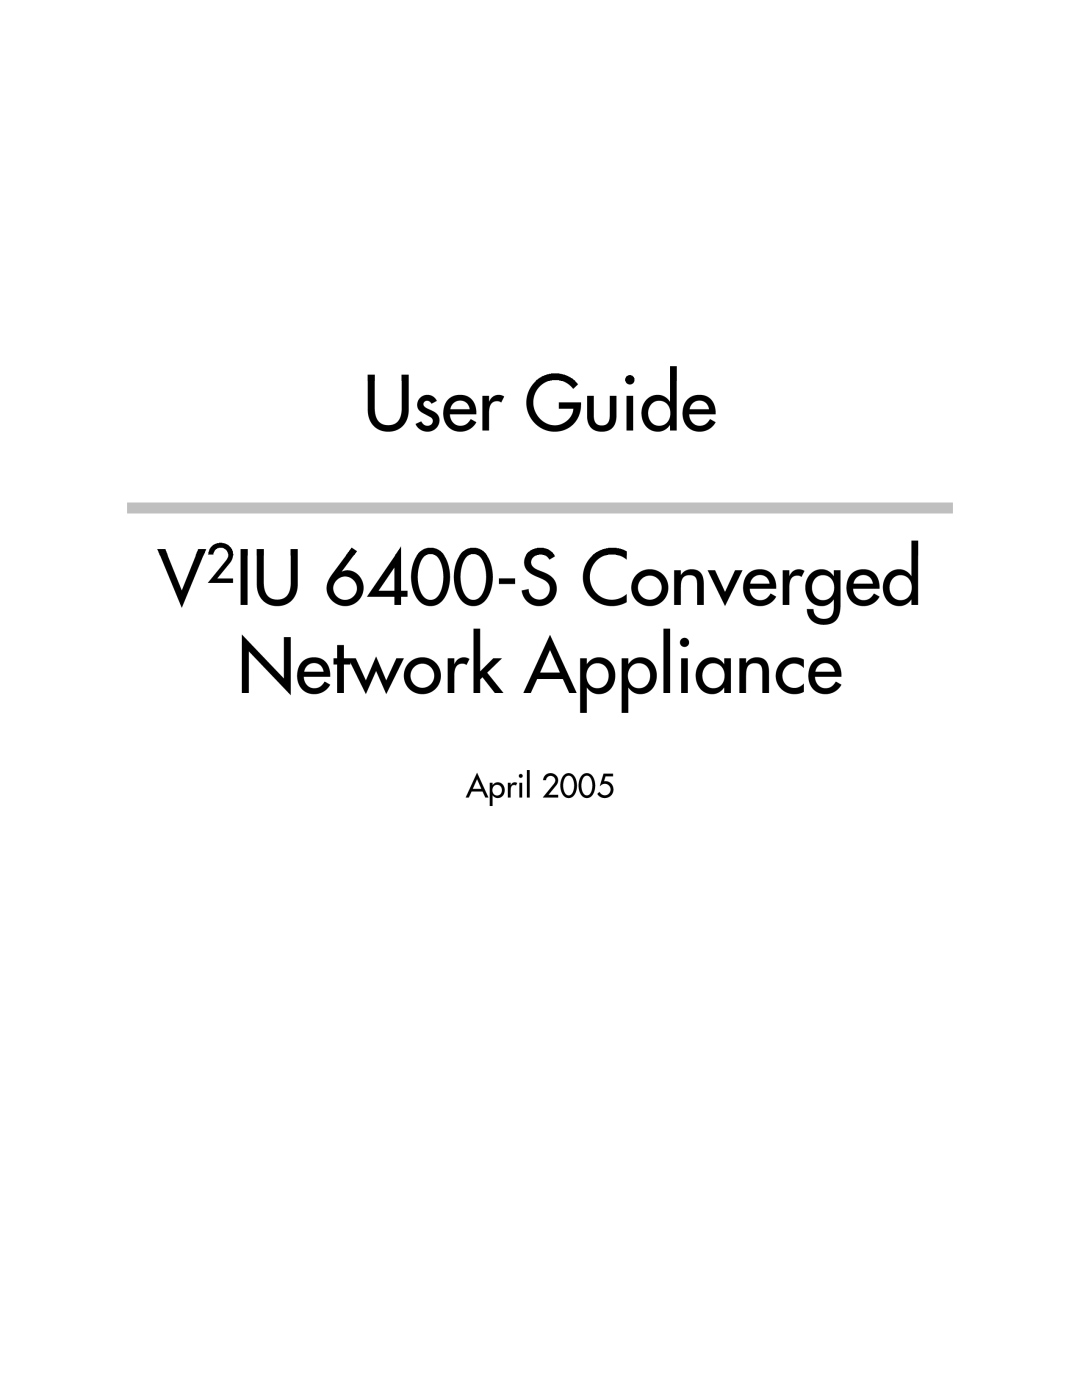 Polycom manual User Guide V2IU 6400-S Converged Network Appliance, April 